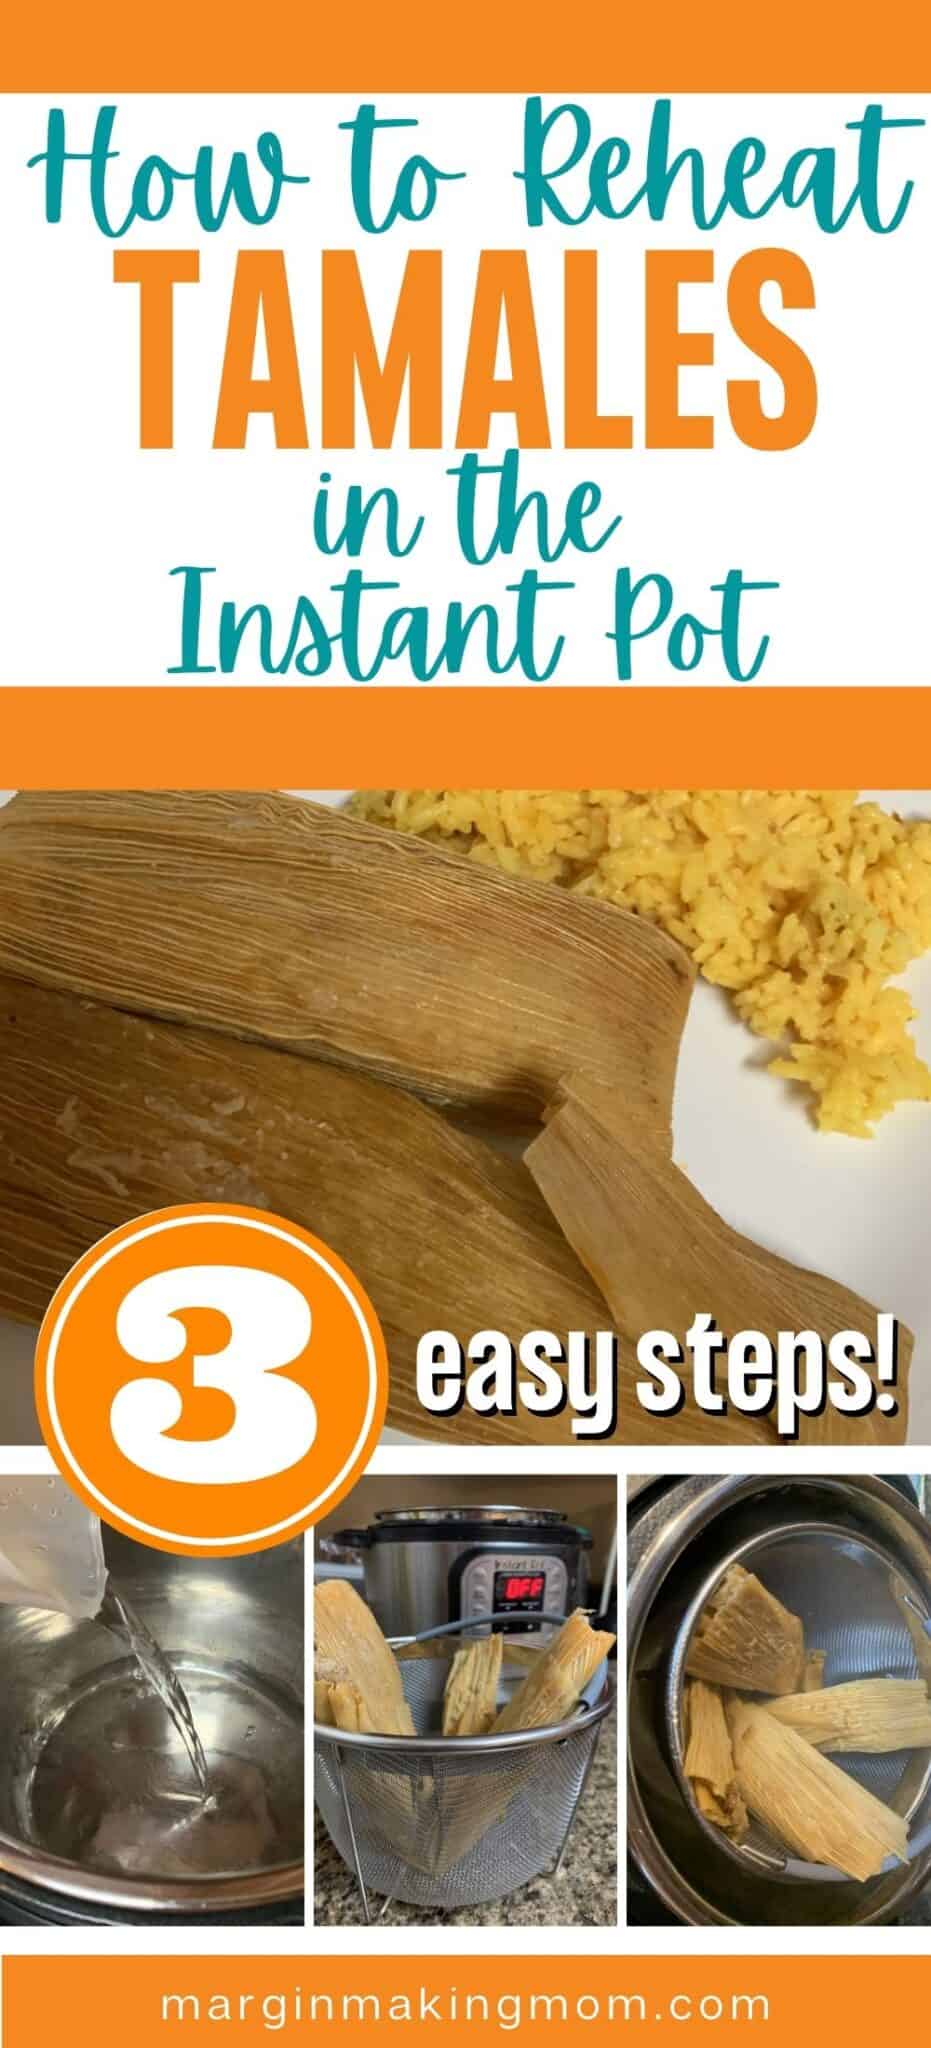 How to Reheat Tamales in the Instant Pot - Margin Making Mom®